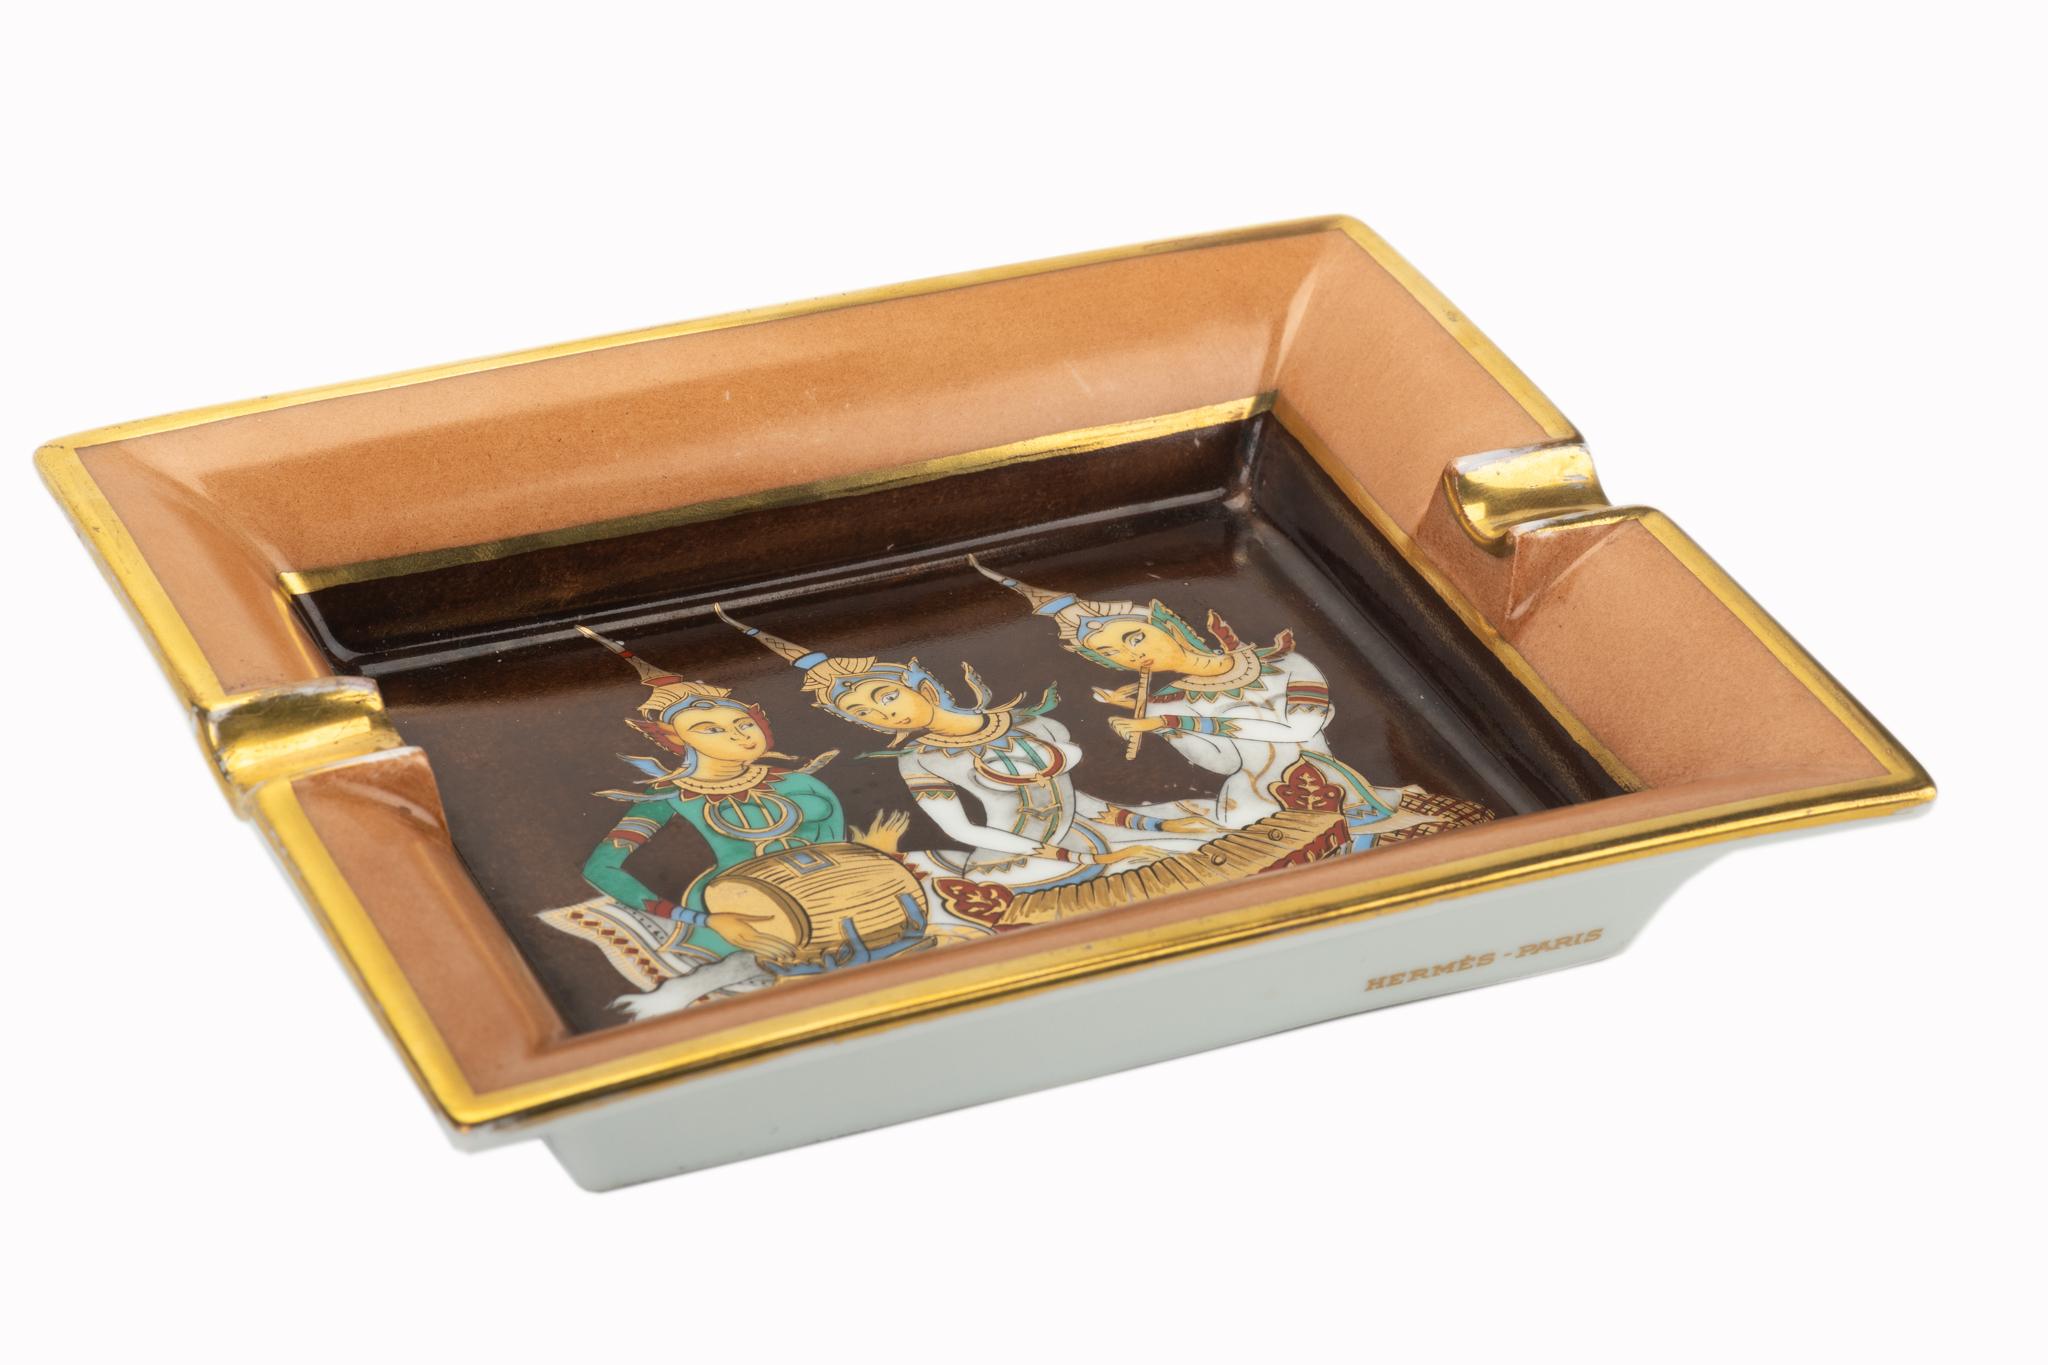 Hermes signature ashtray with indian design in brown, caramel and gold. Suede stamped bottom. minor wear on it. Made in France.
